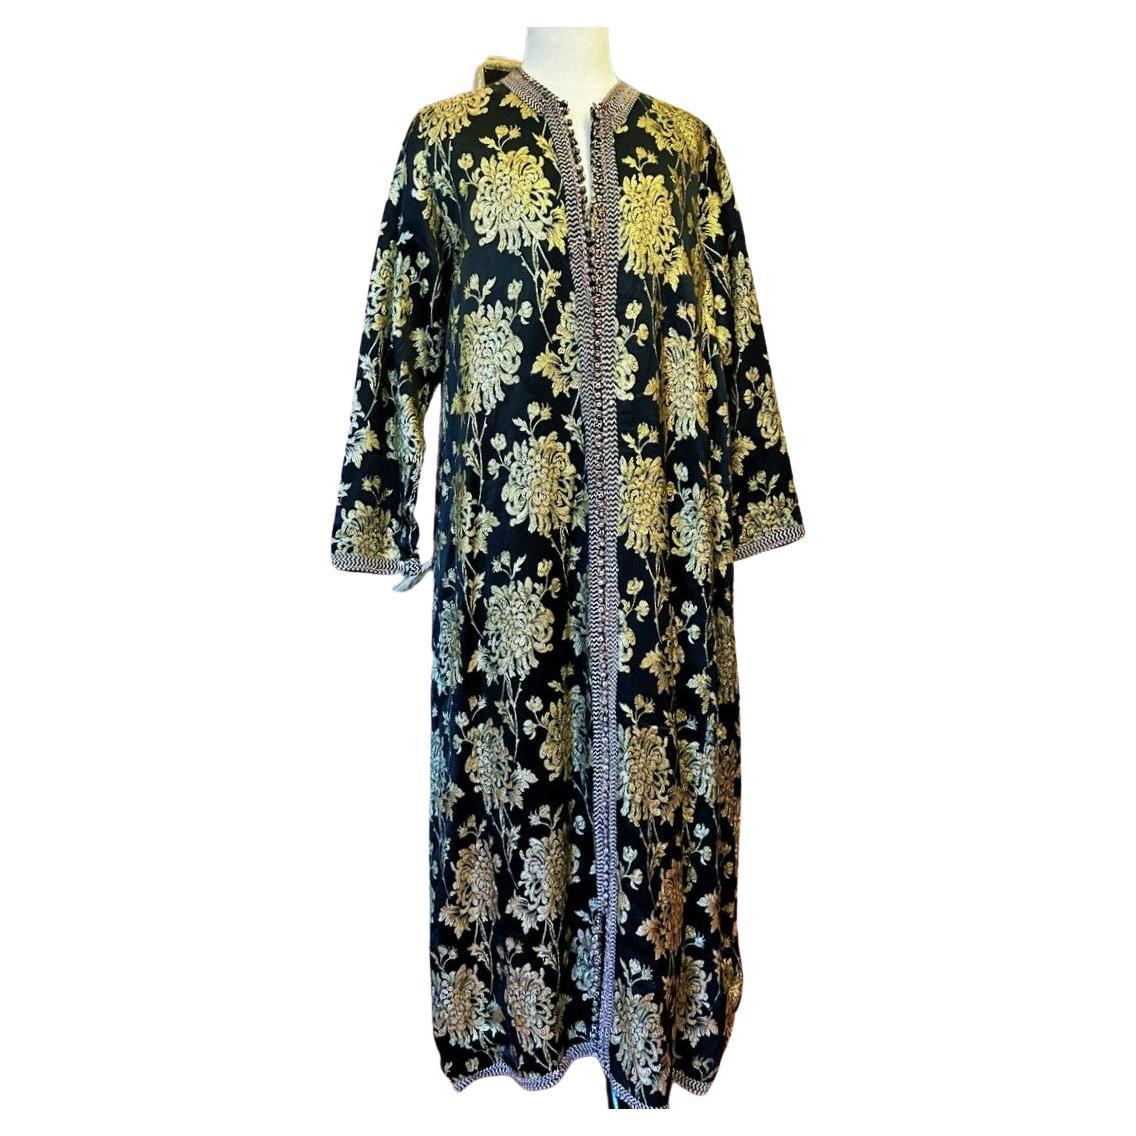 Moroccan Kaftan In Black Satin Brocaded With Golden Blades - Circa 1950-60 For Sale